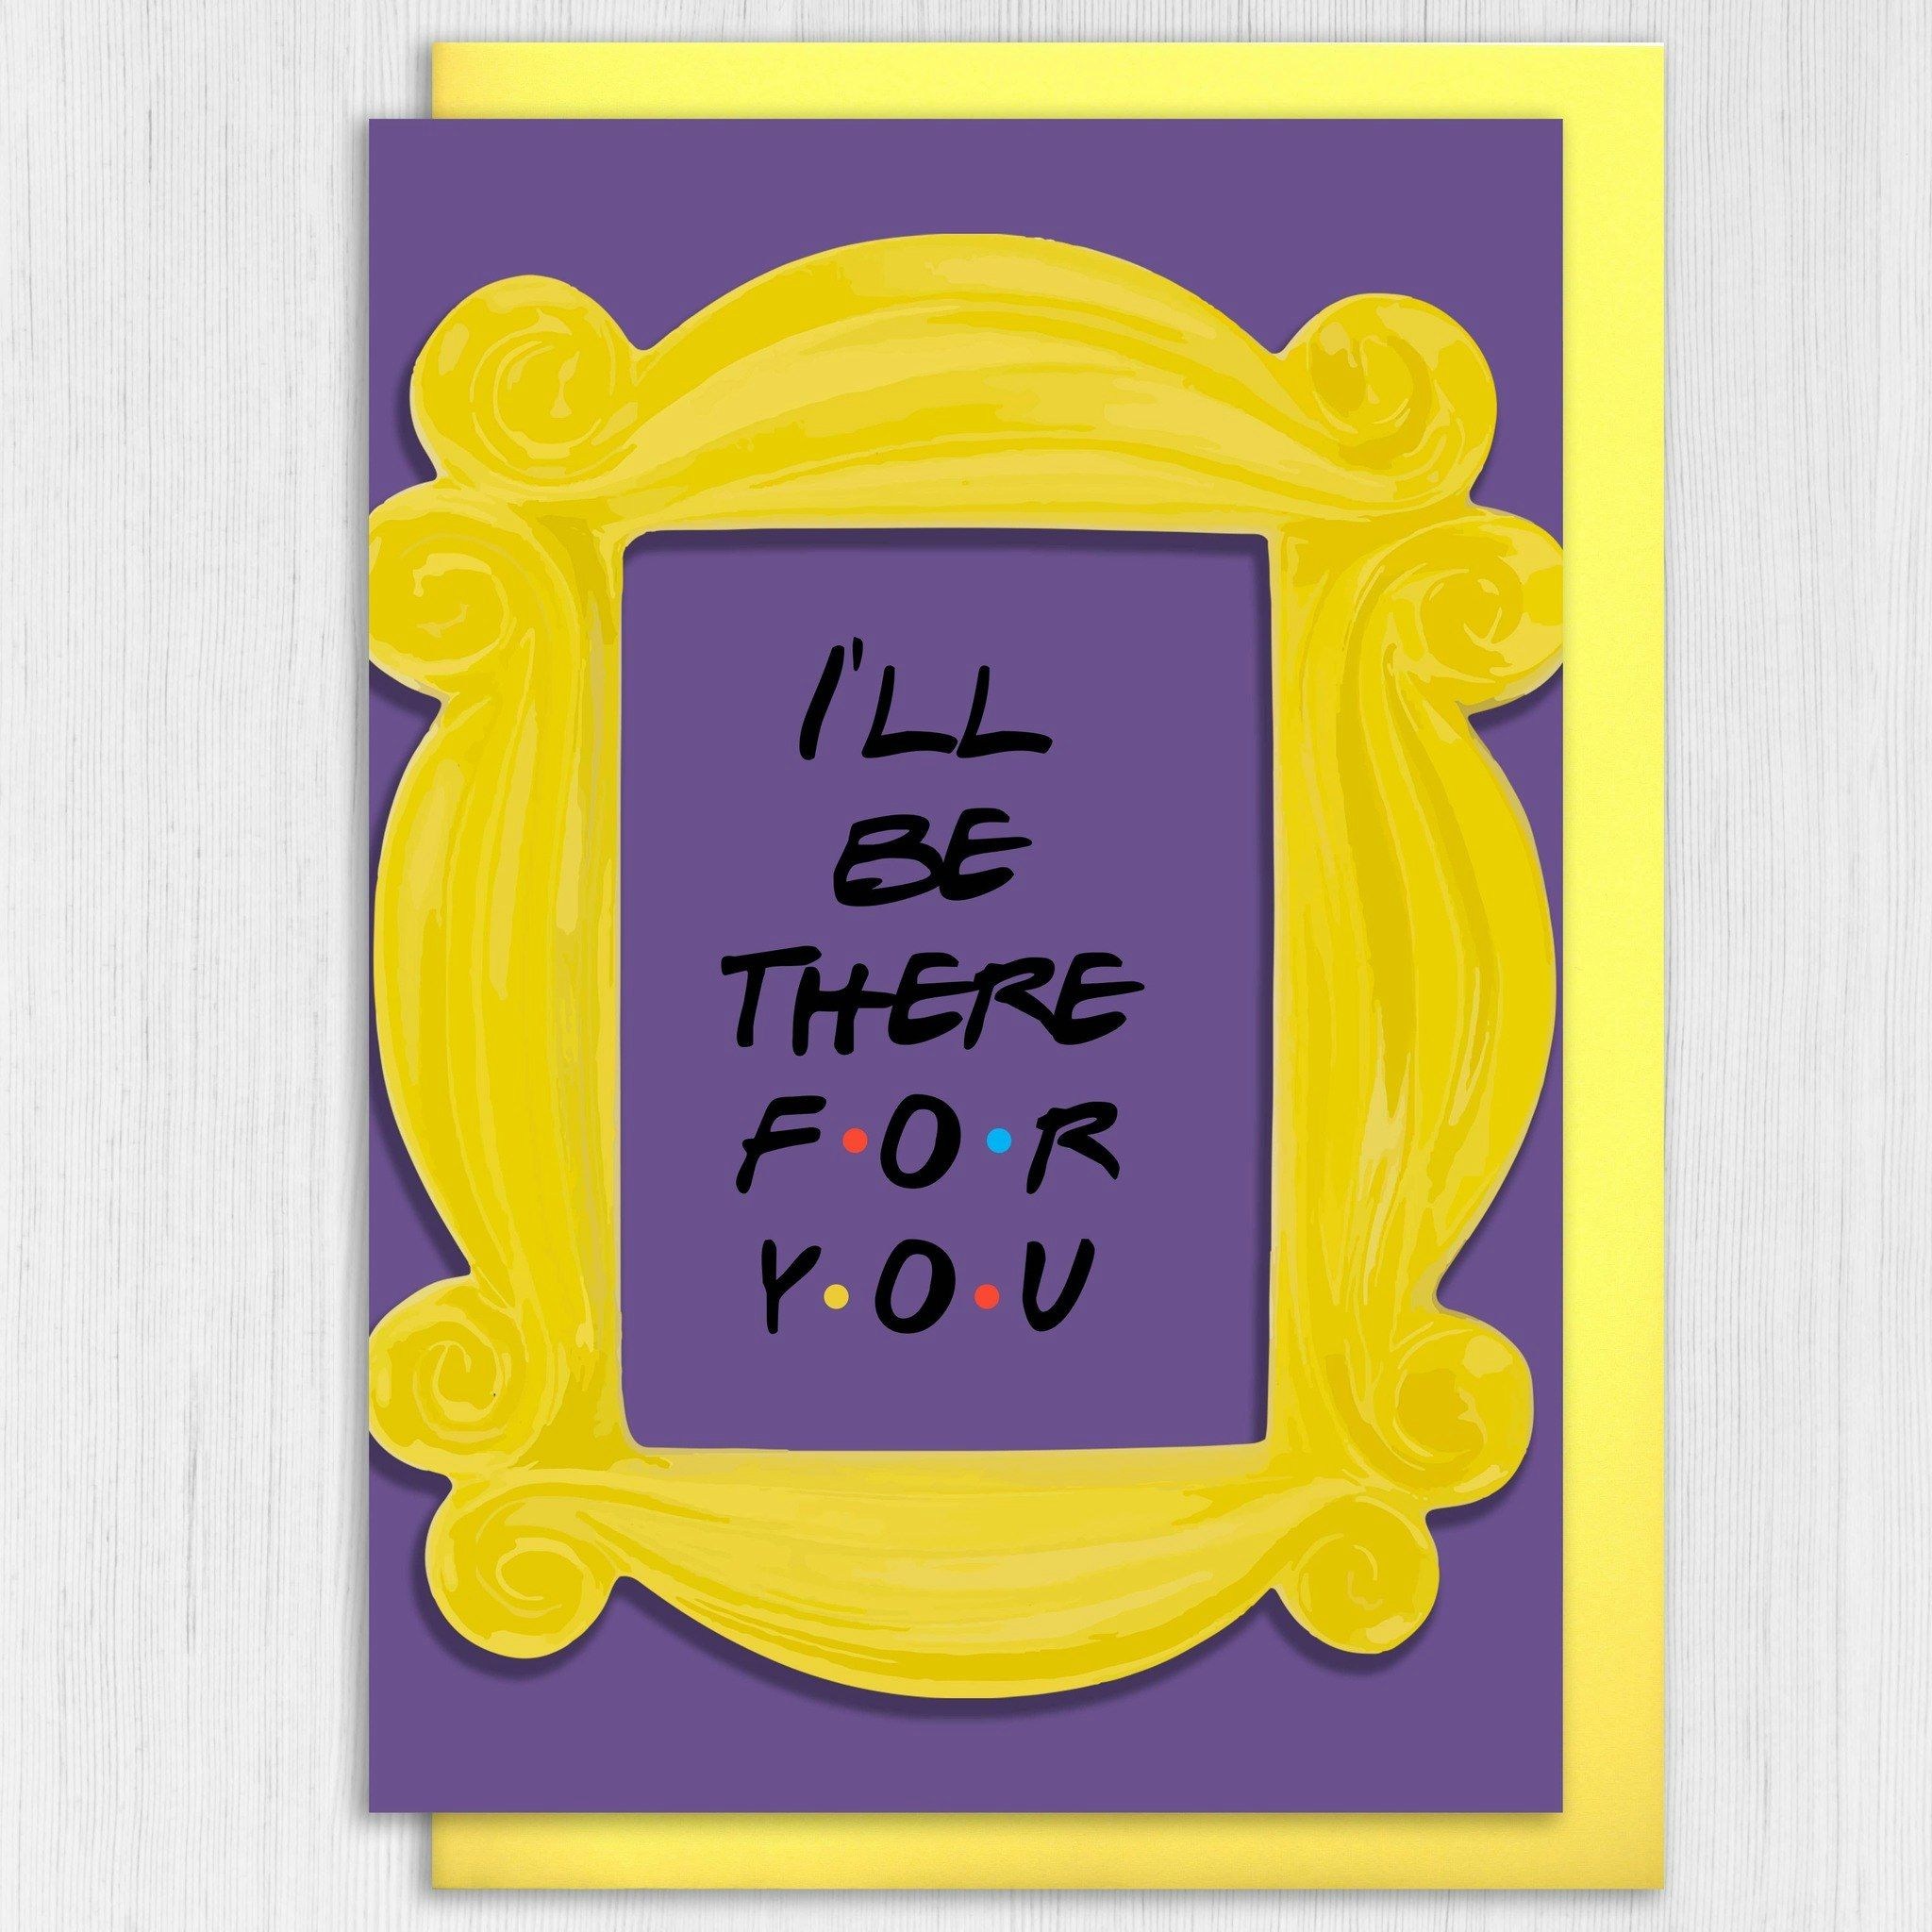 Prints with Personality - Friends: "I'll be there for you" Card - Raus  Hverdag